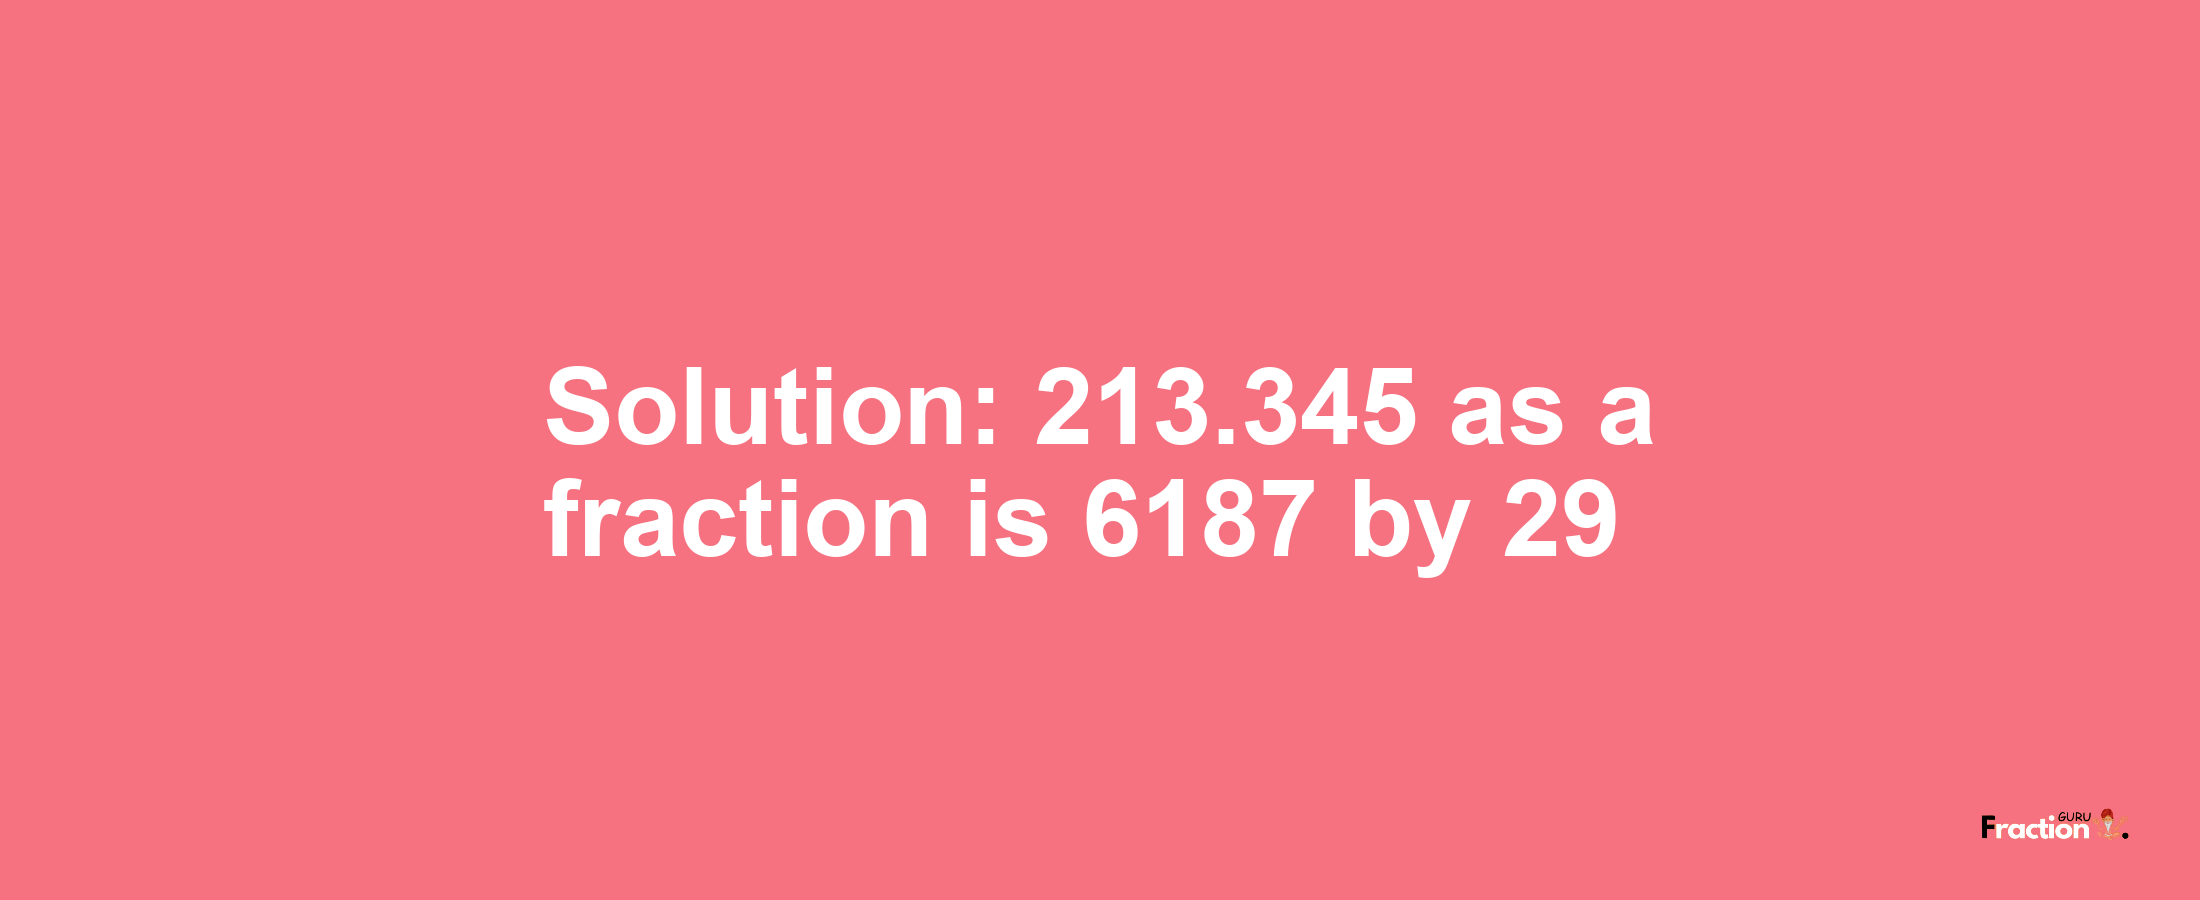 Solution:213.345 as a fraction is 6187/29